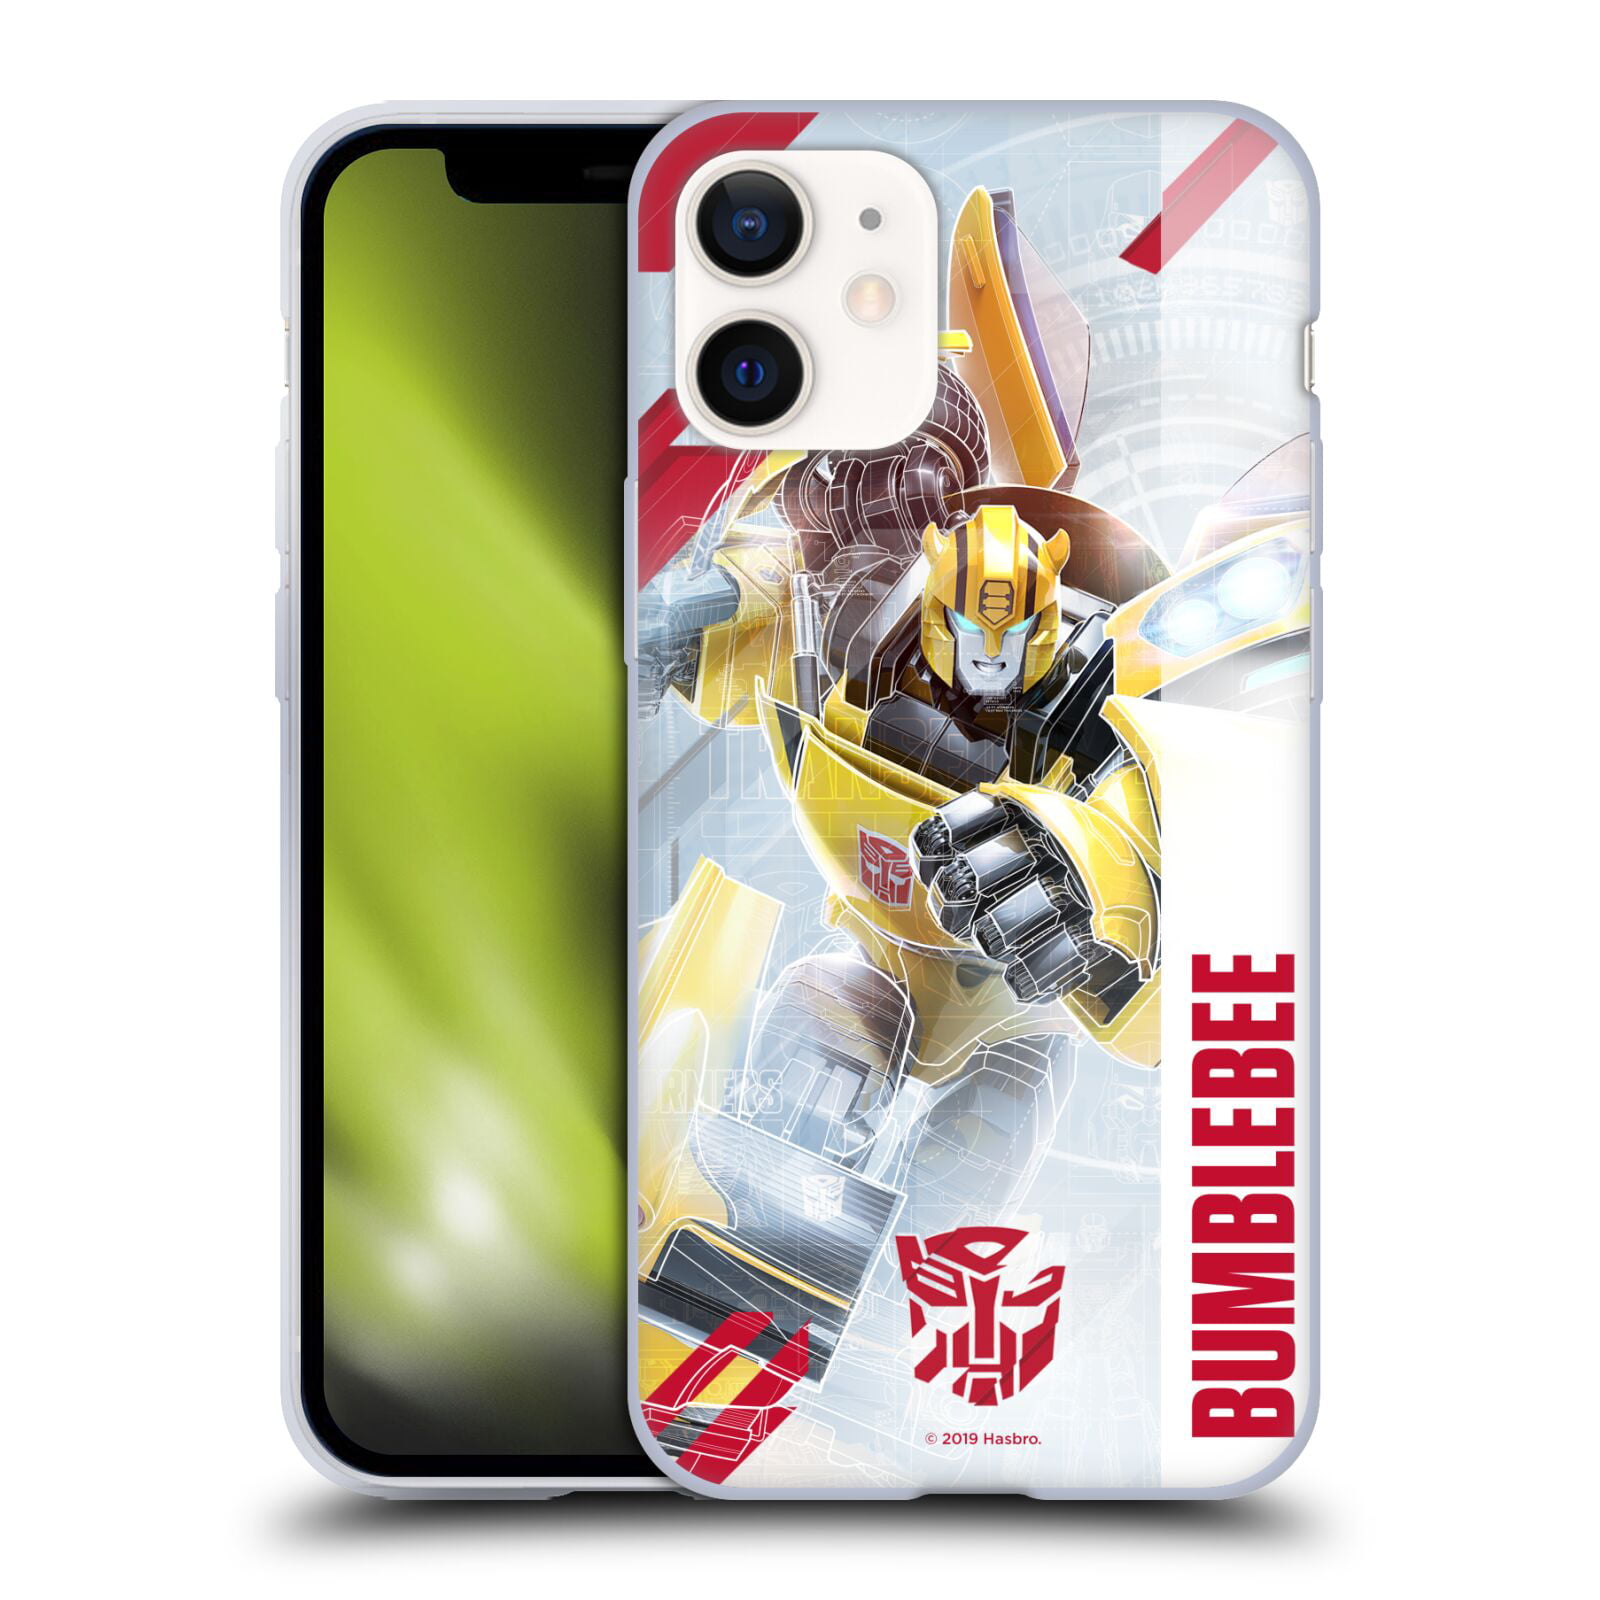 Transformers Universe Bumblebee Phone Case Shockproof Scratch-resistant Maximum Protection For iPhone 6 7 8 X XR XS 11 12 Pro Max Mini